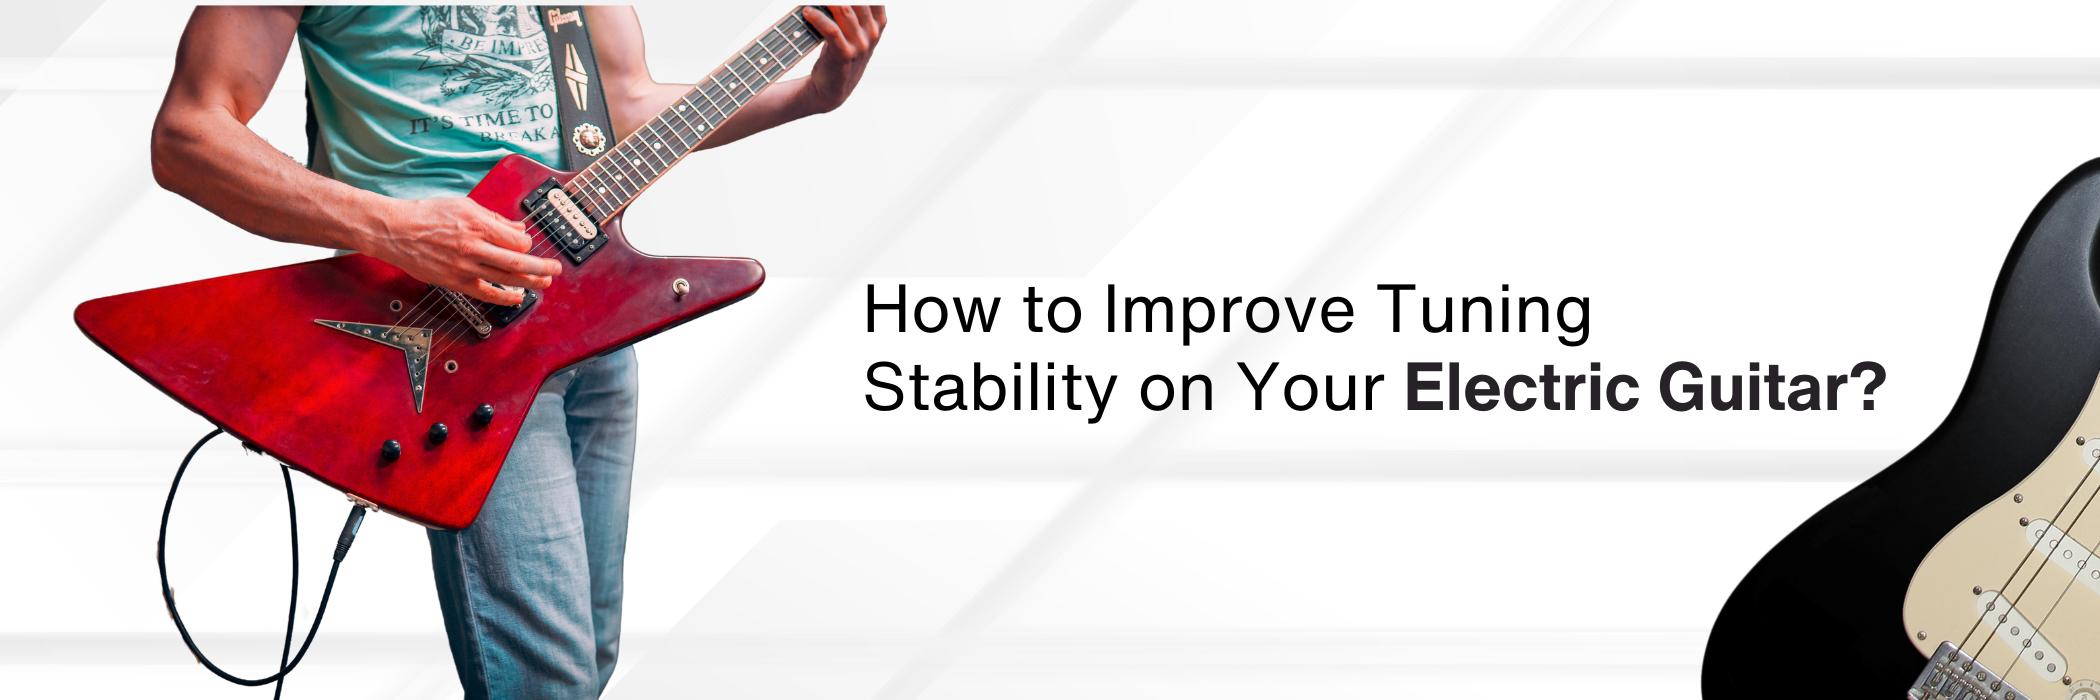 How to Improve Tuning Stability on Your Electric Guitar?